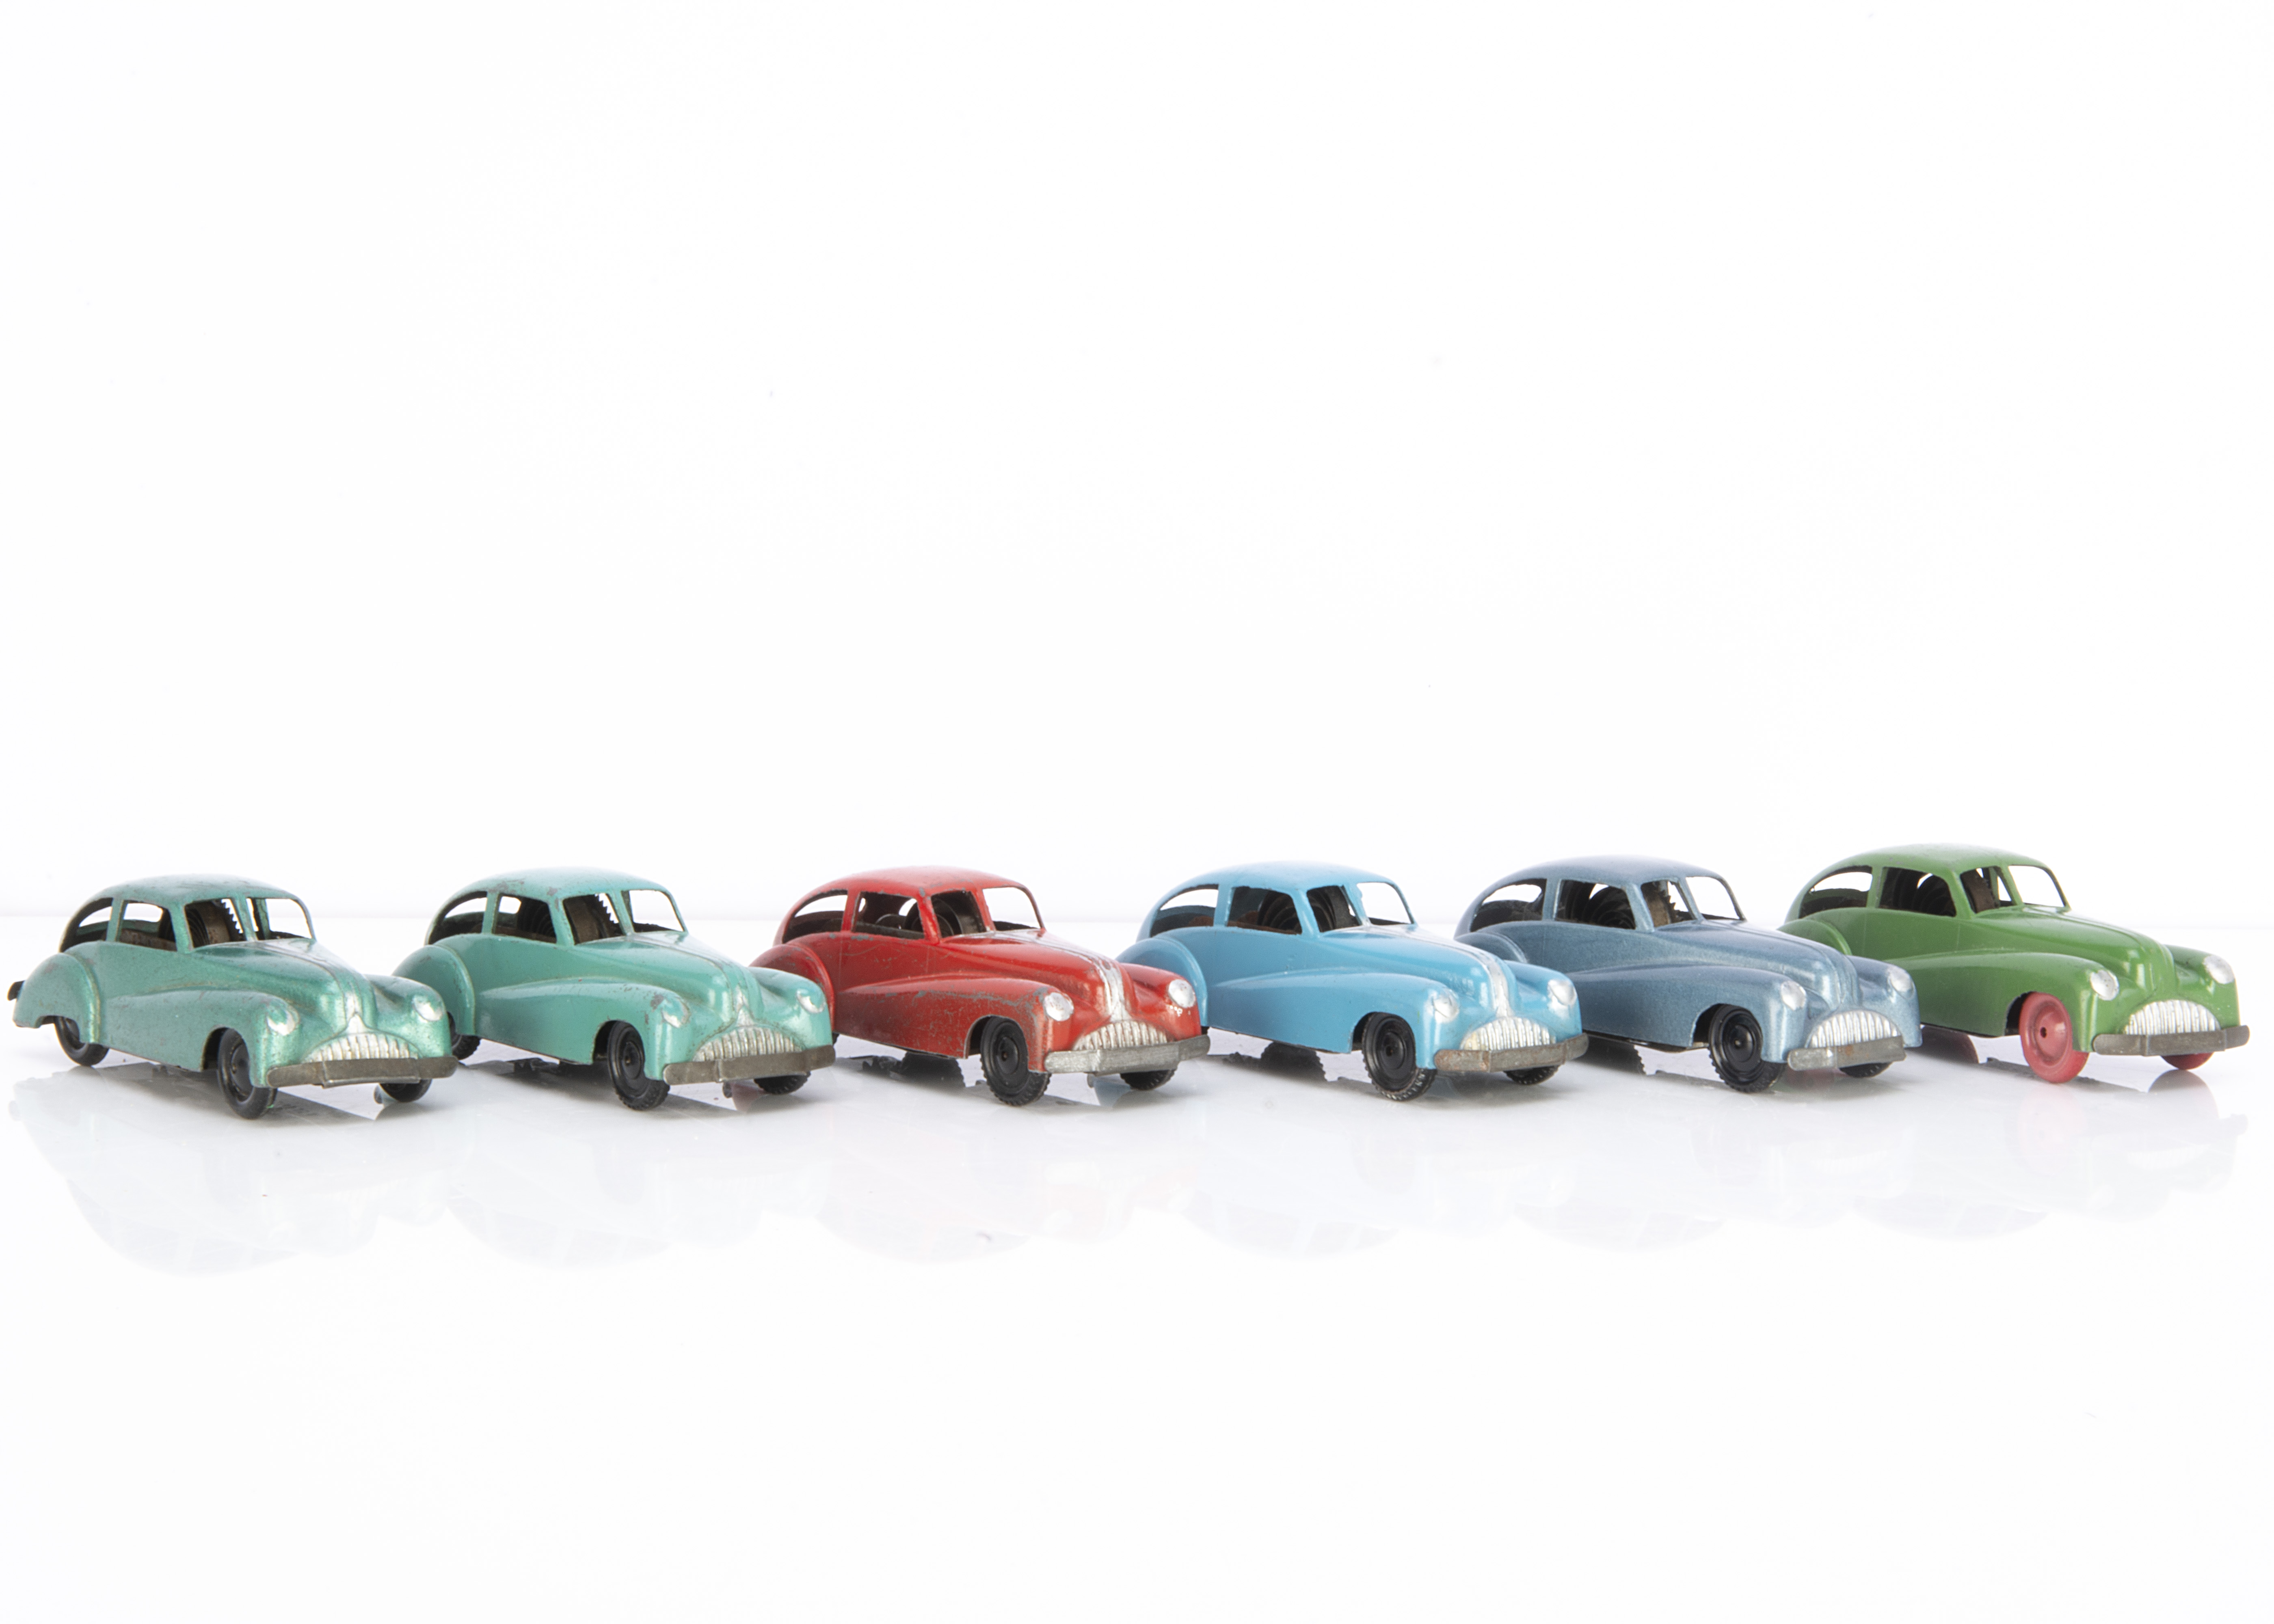 Brimtoy Pocketoy Clockwork No.505 Buick Coupe, six examples, turquoise, red, light blue, metallic